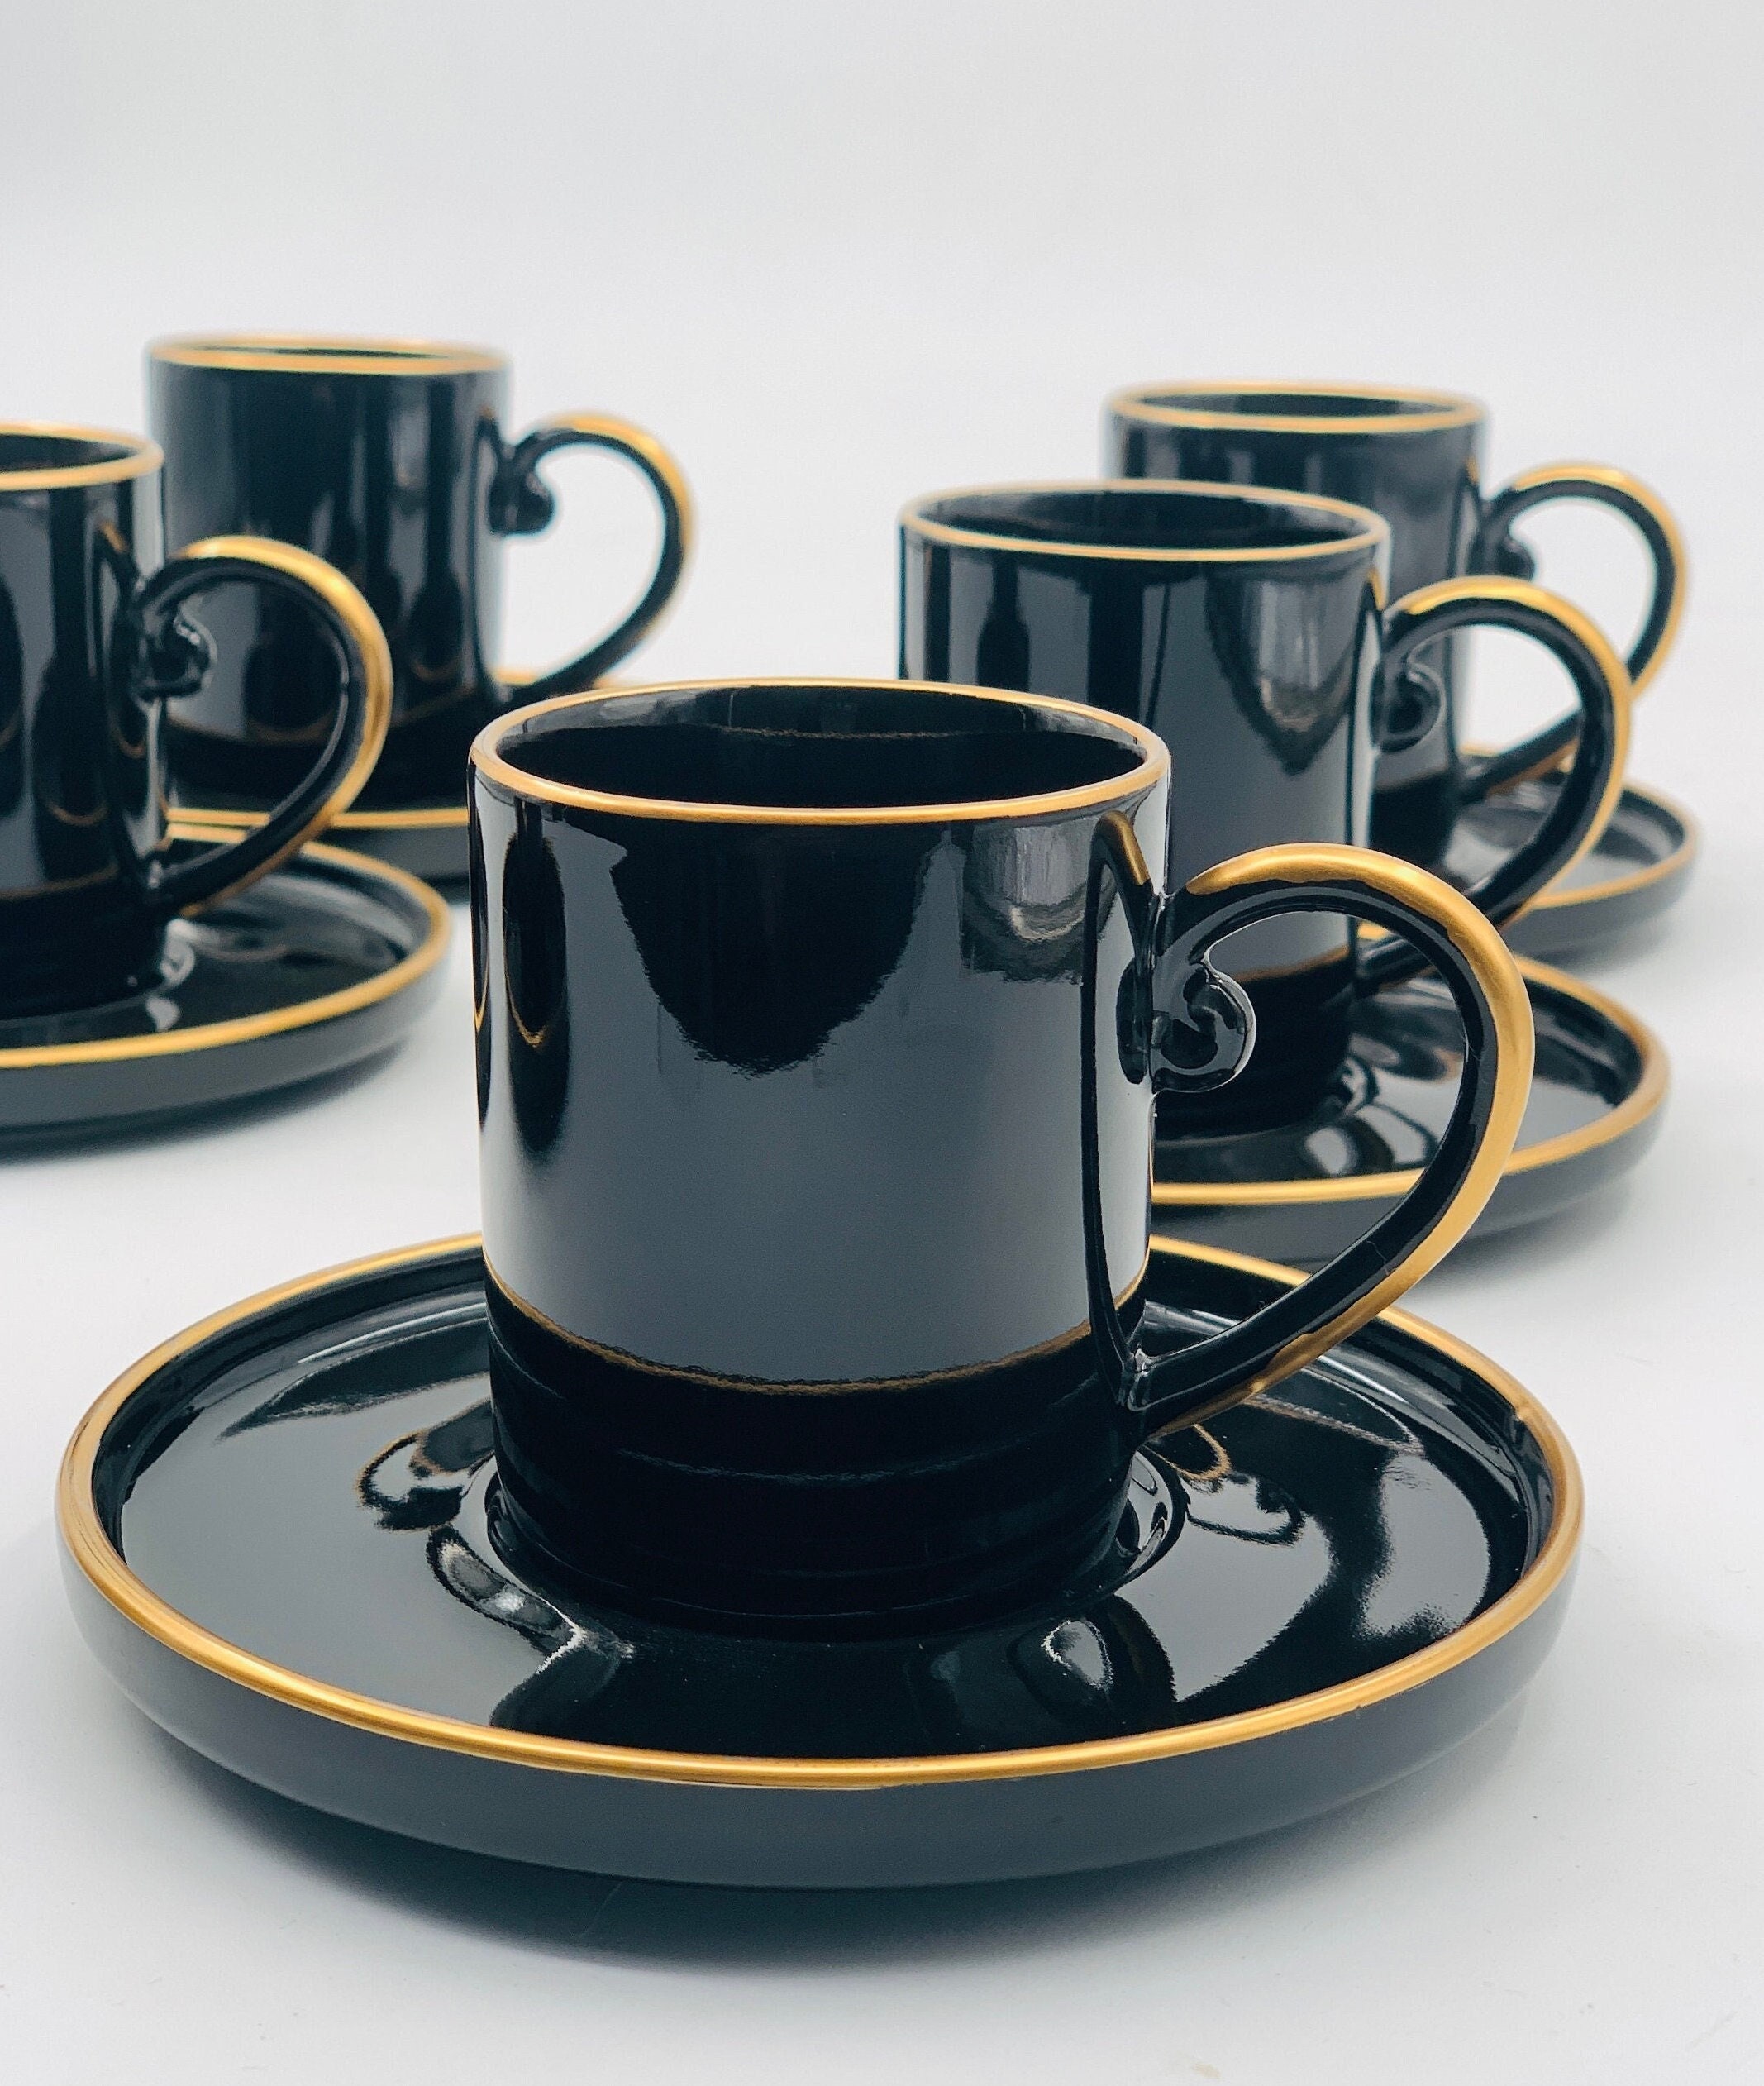 Set of 6 Porcelain Espresso Cups 3 Oz Arabic/greek/turkish Coffee Cups Set  Gold Rimmed Black Cups Set With Handle Coffee Cup Set With Saucer 